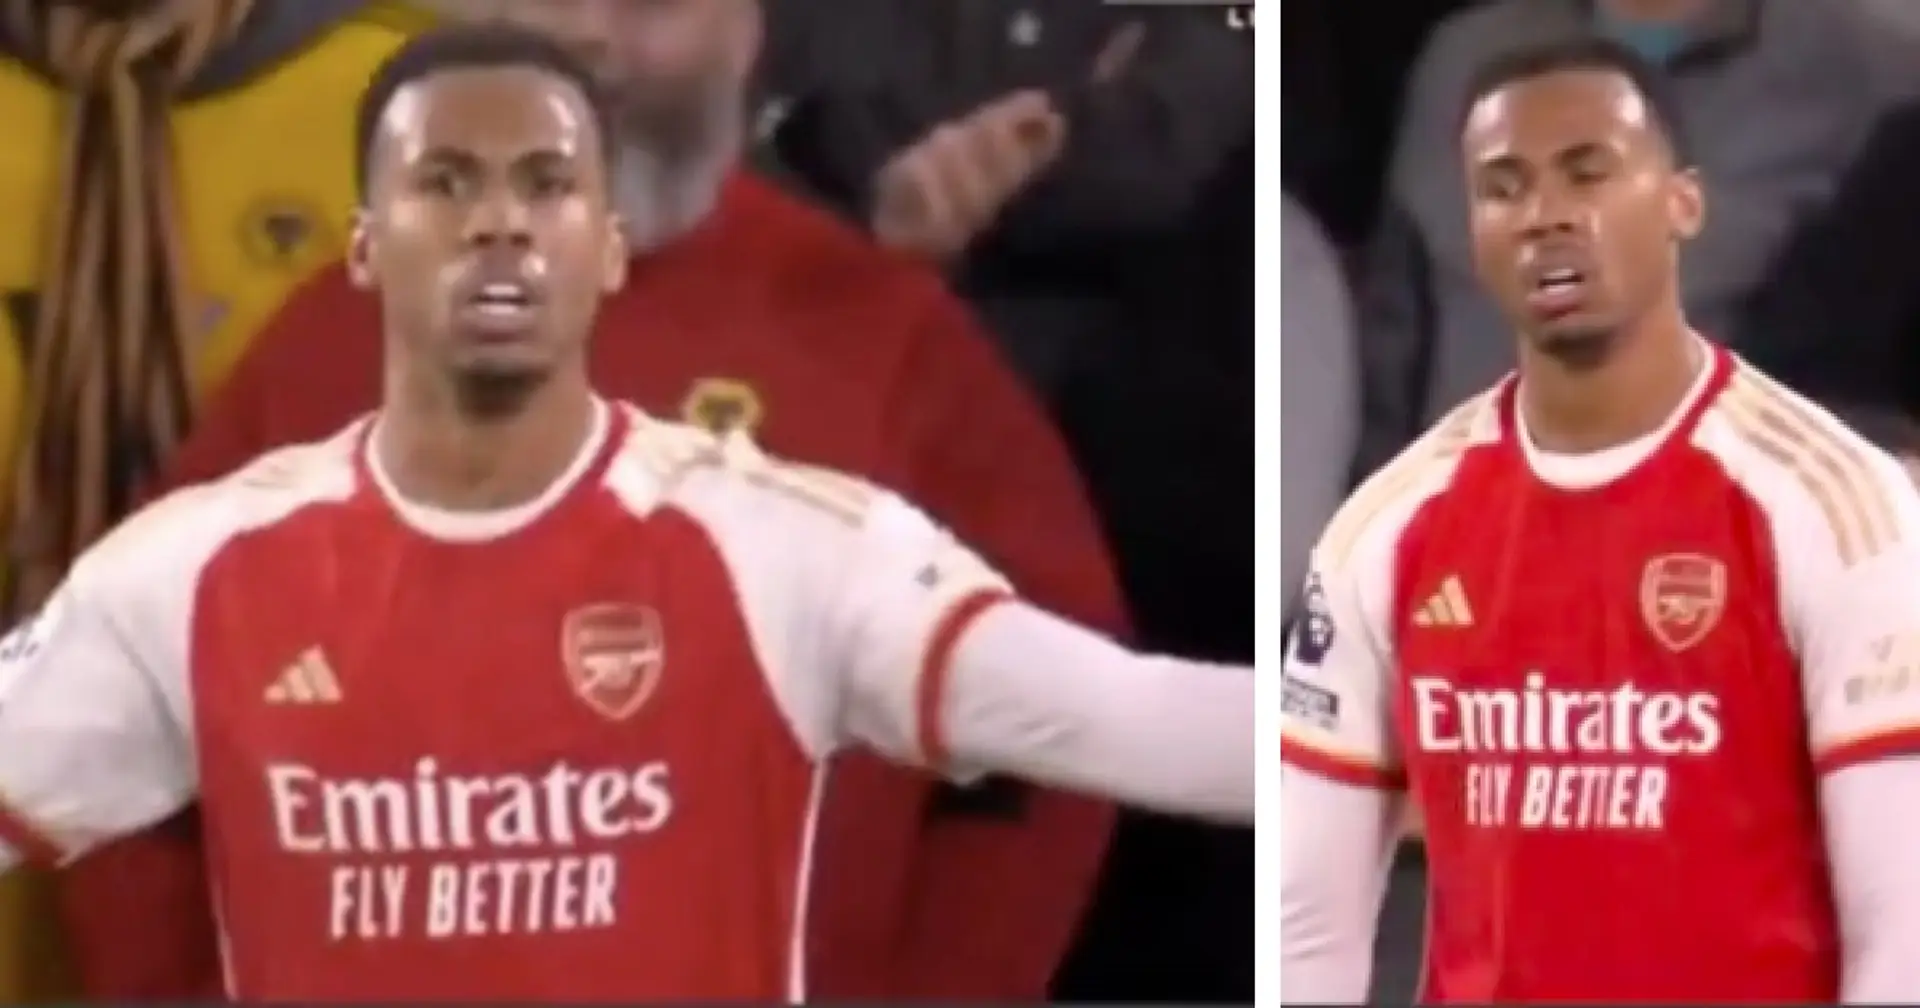 Decisive moment Gabriel berated Arsenal teammates before Odegard's goal - spotted 